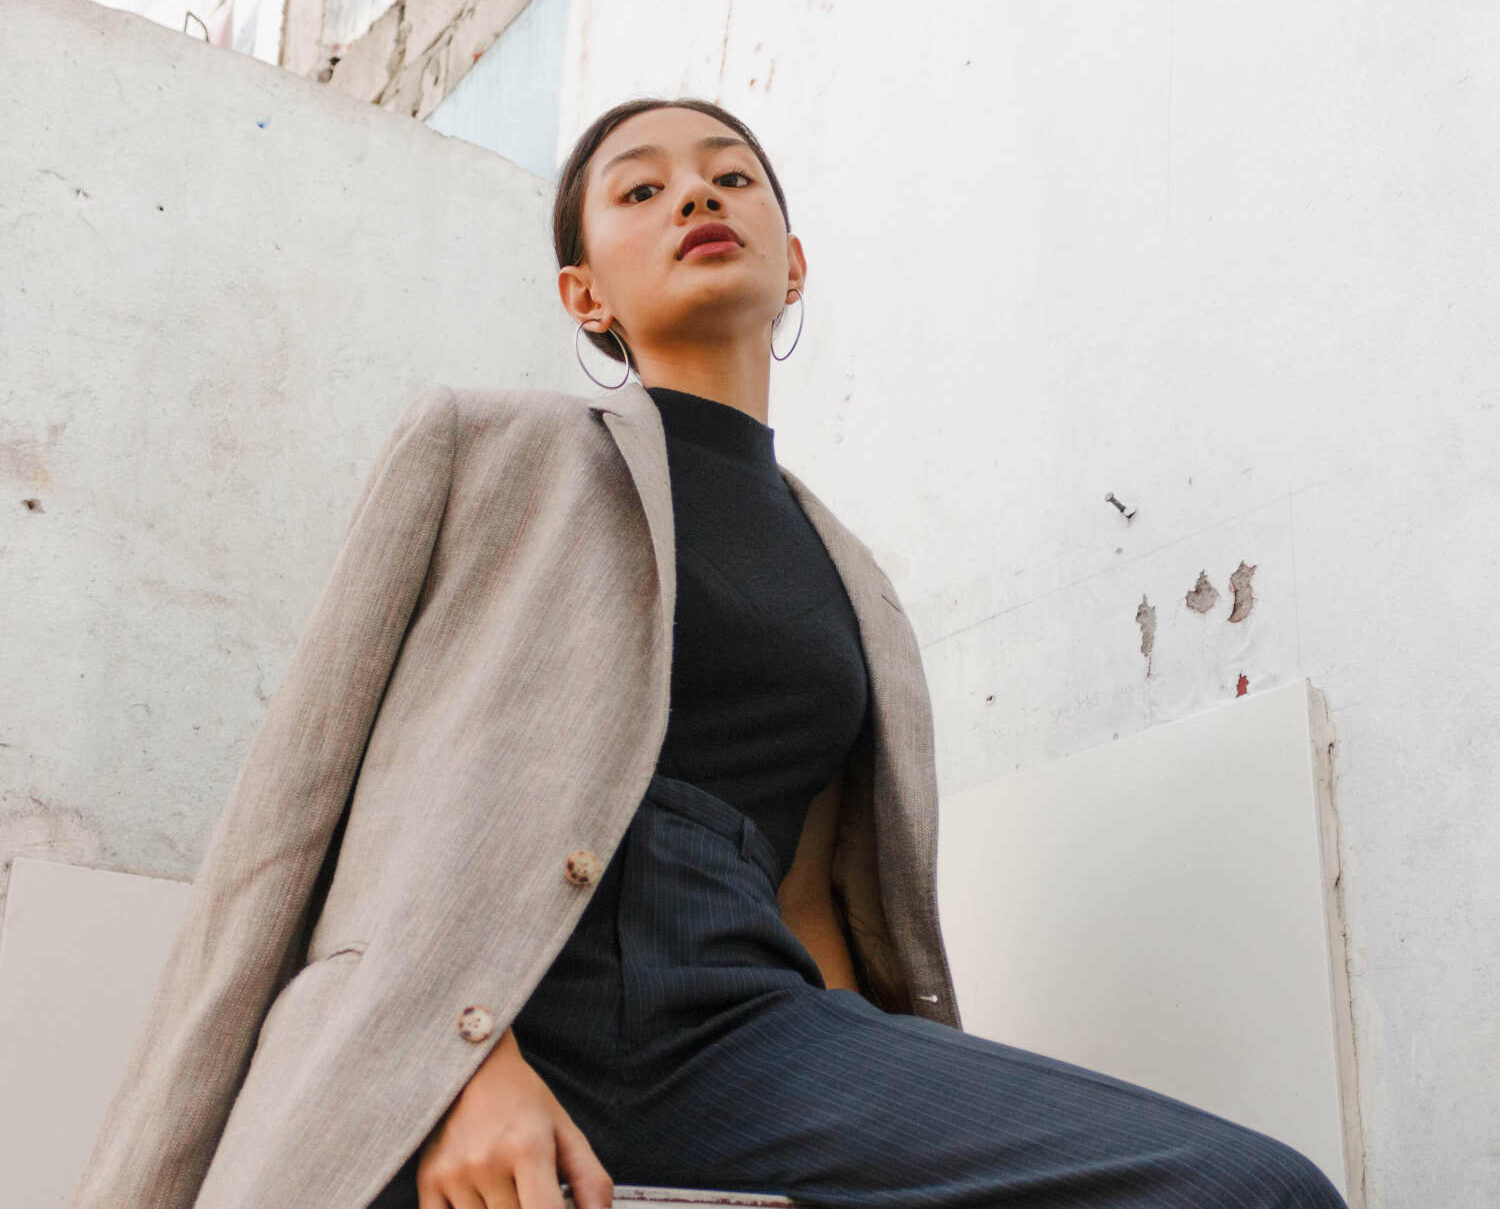 women posing in powerful position with business attire